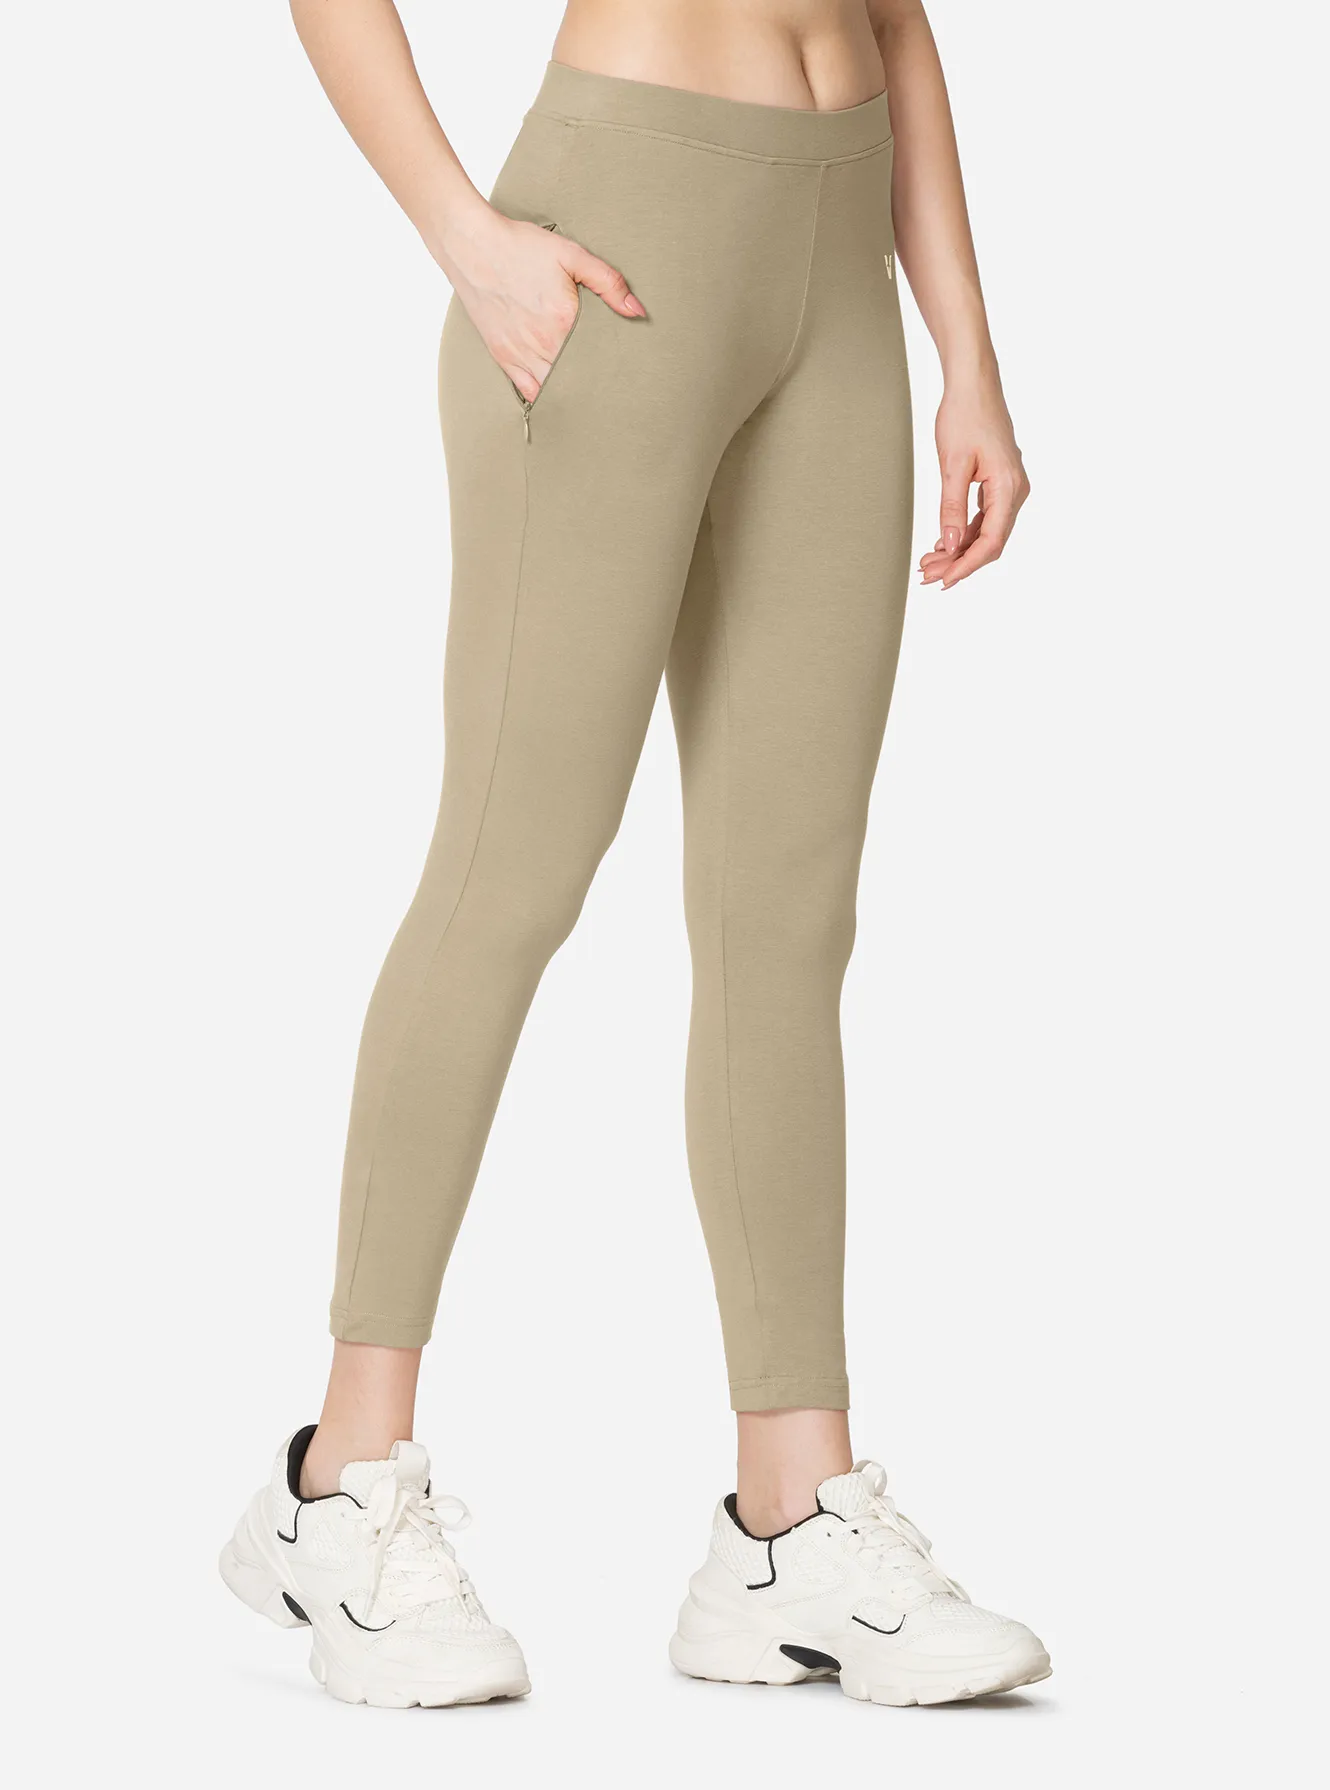 Women ankle length stretchable leggings with secured side pocket